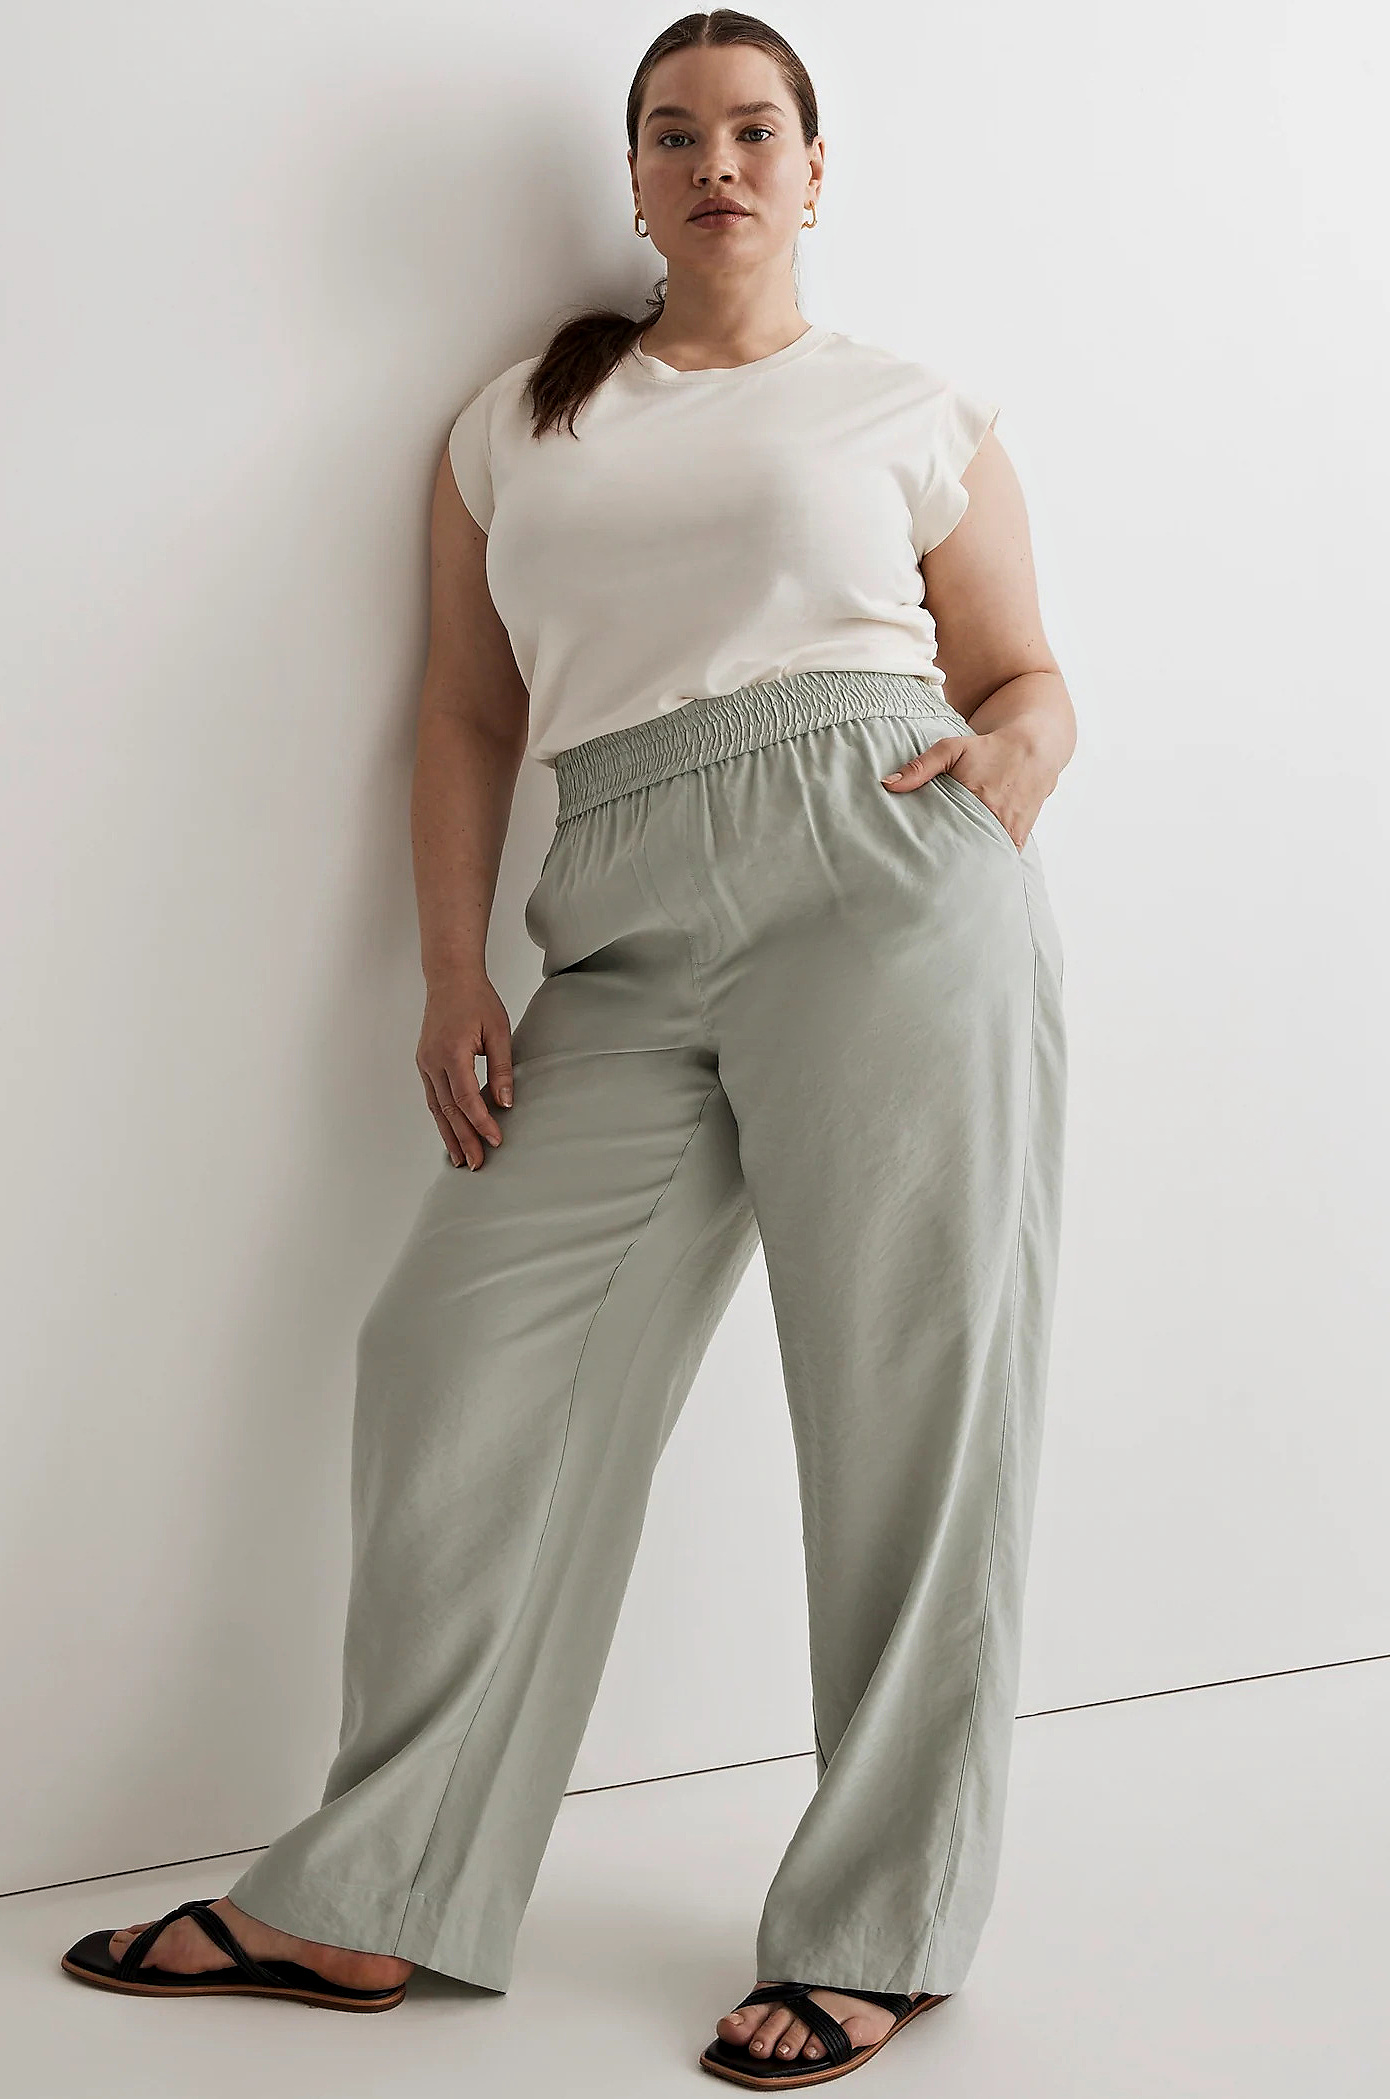 Best Wide Leg Pants for Women: Comfy for Flights or Sightseeing